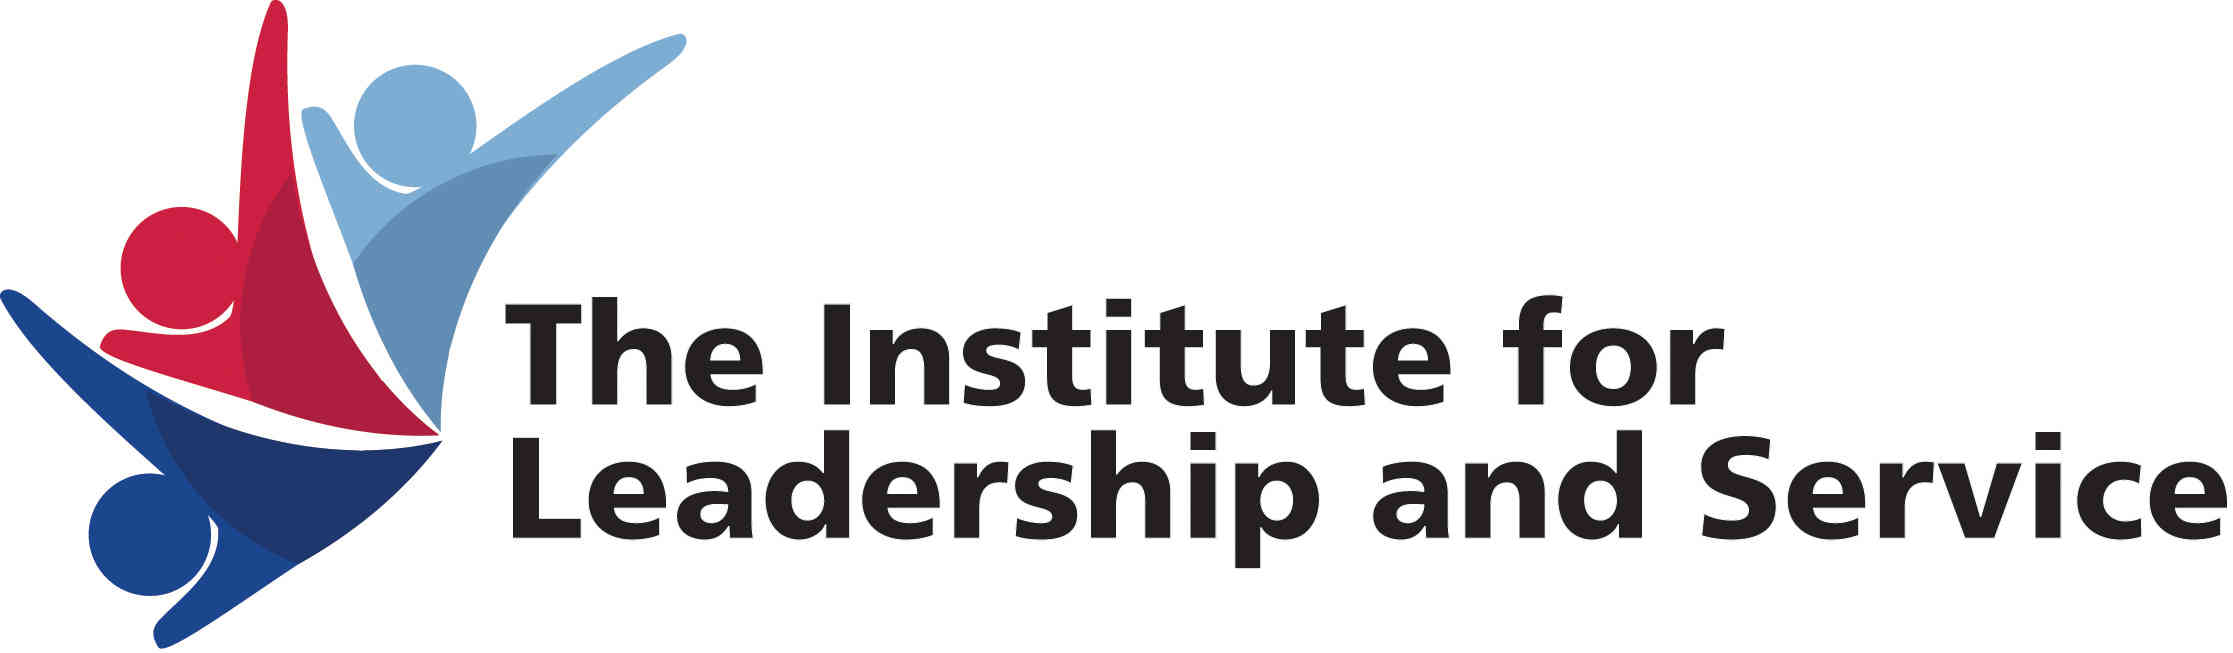 Institute for Leadership and Service Logo